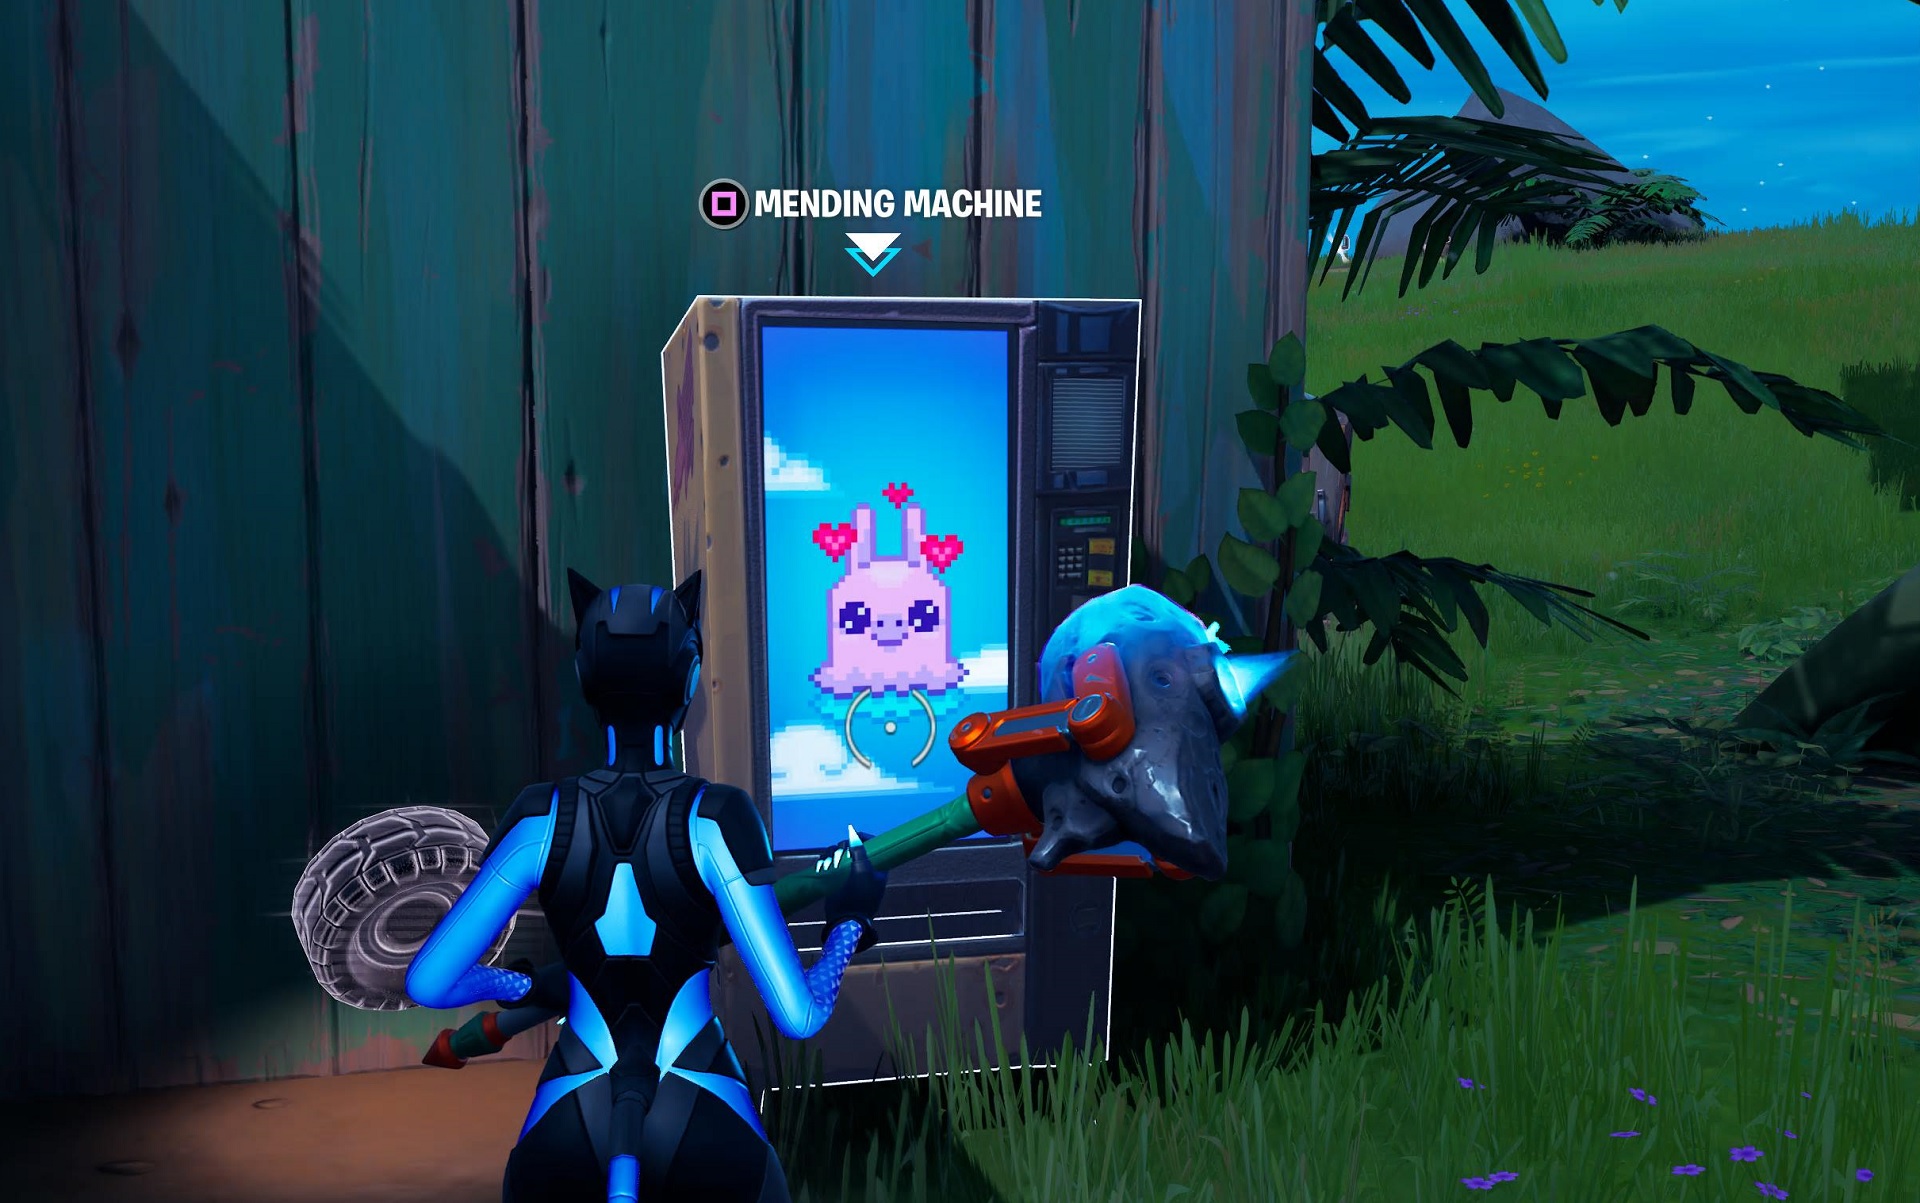 Here’s where you can find every Mending Machine in Fortnite